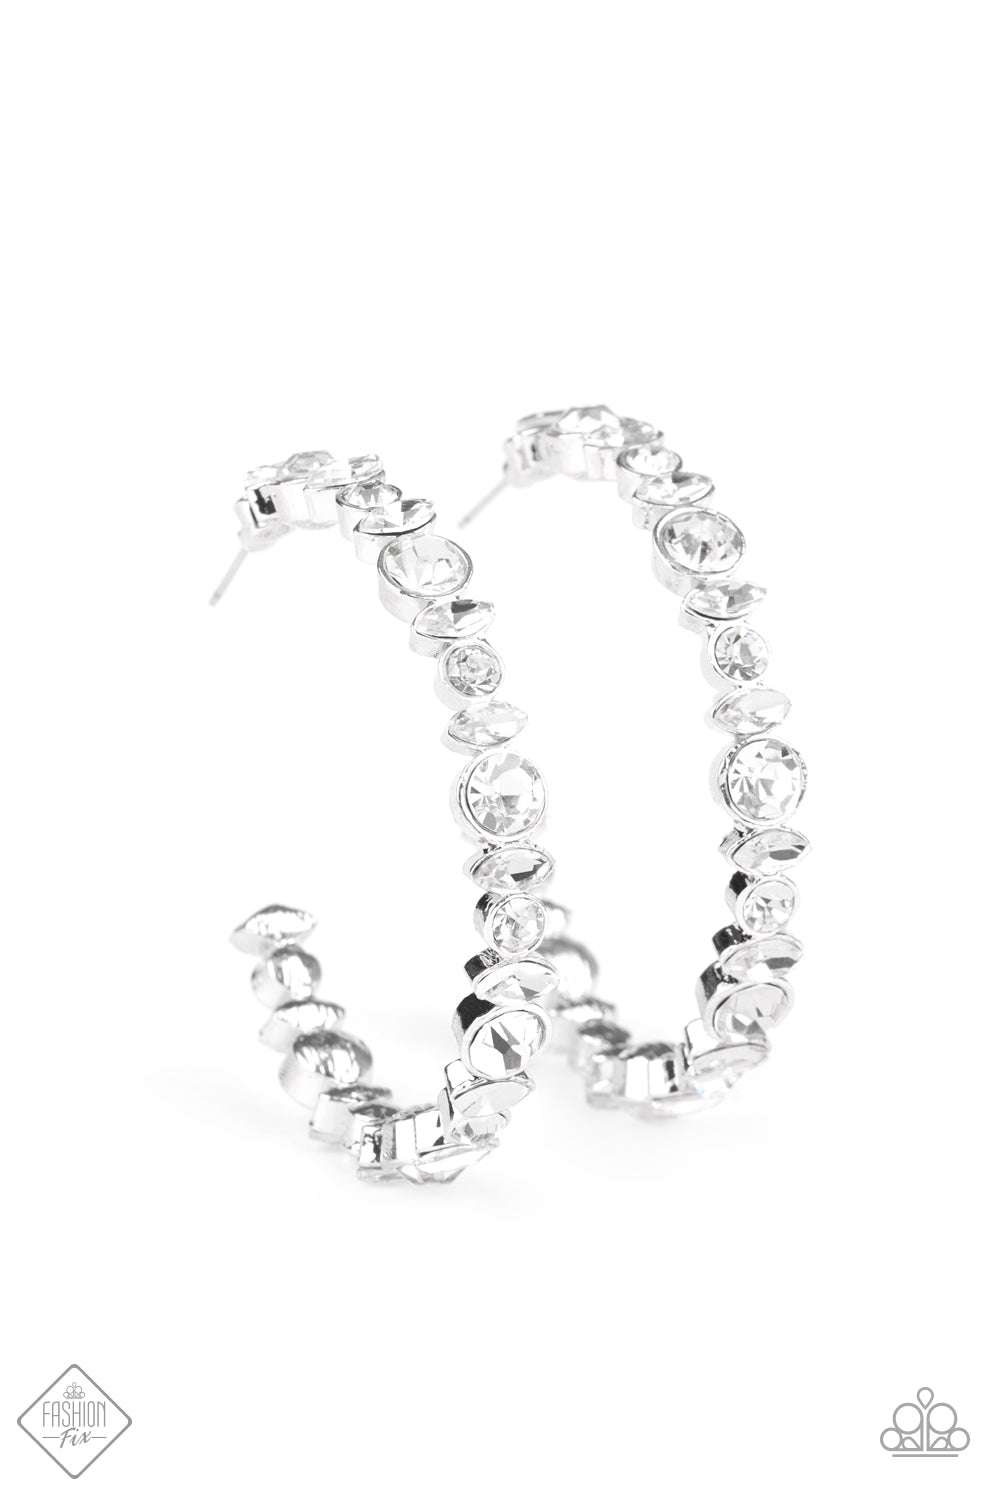 Paparazzi Can I Have Your Attention? White Post Hoop Earrings - Fashion Fix Exclusive Fiercely 5th Avenue September 2020